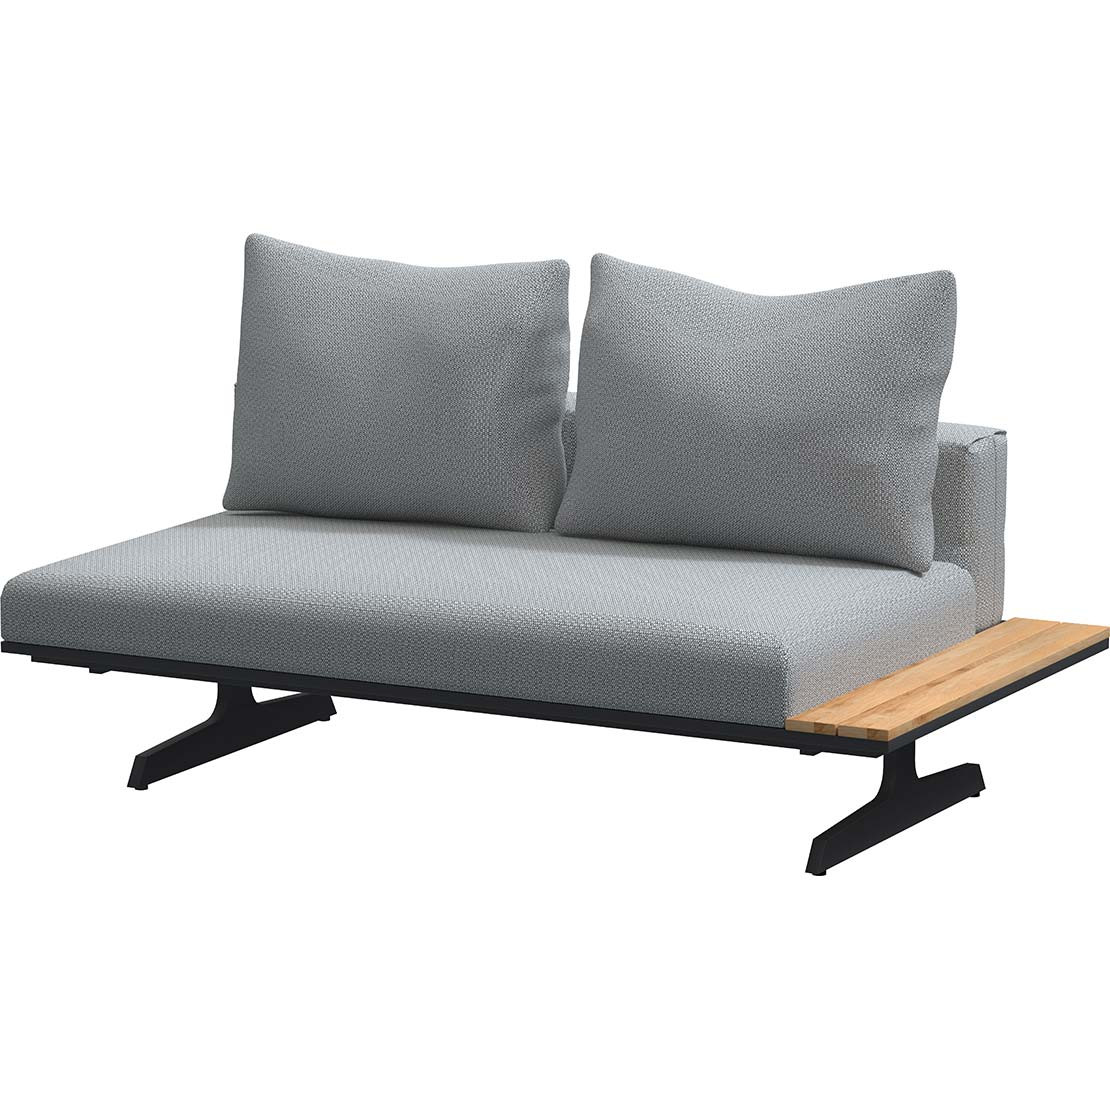 Endless multi concept Anthracite bench and chaise lounge 172 x 95 cm